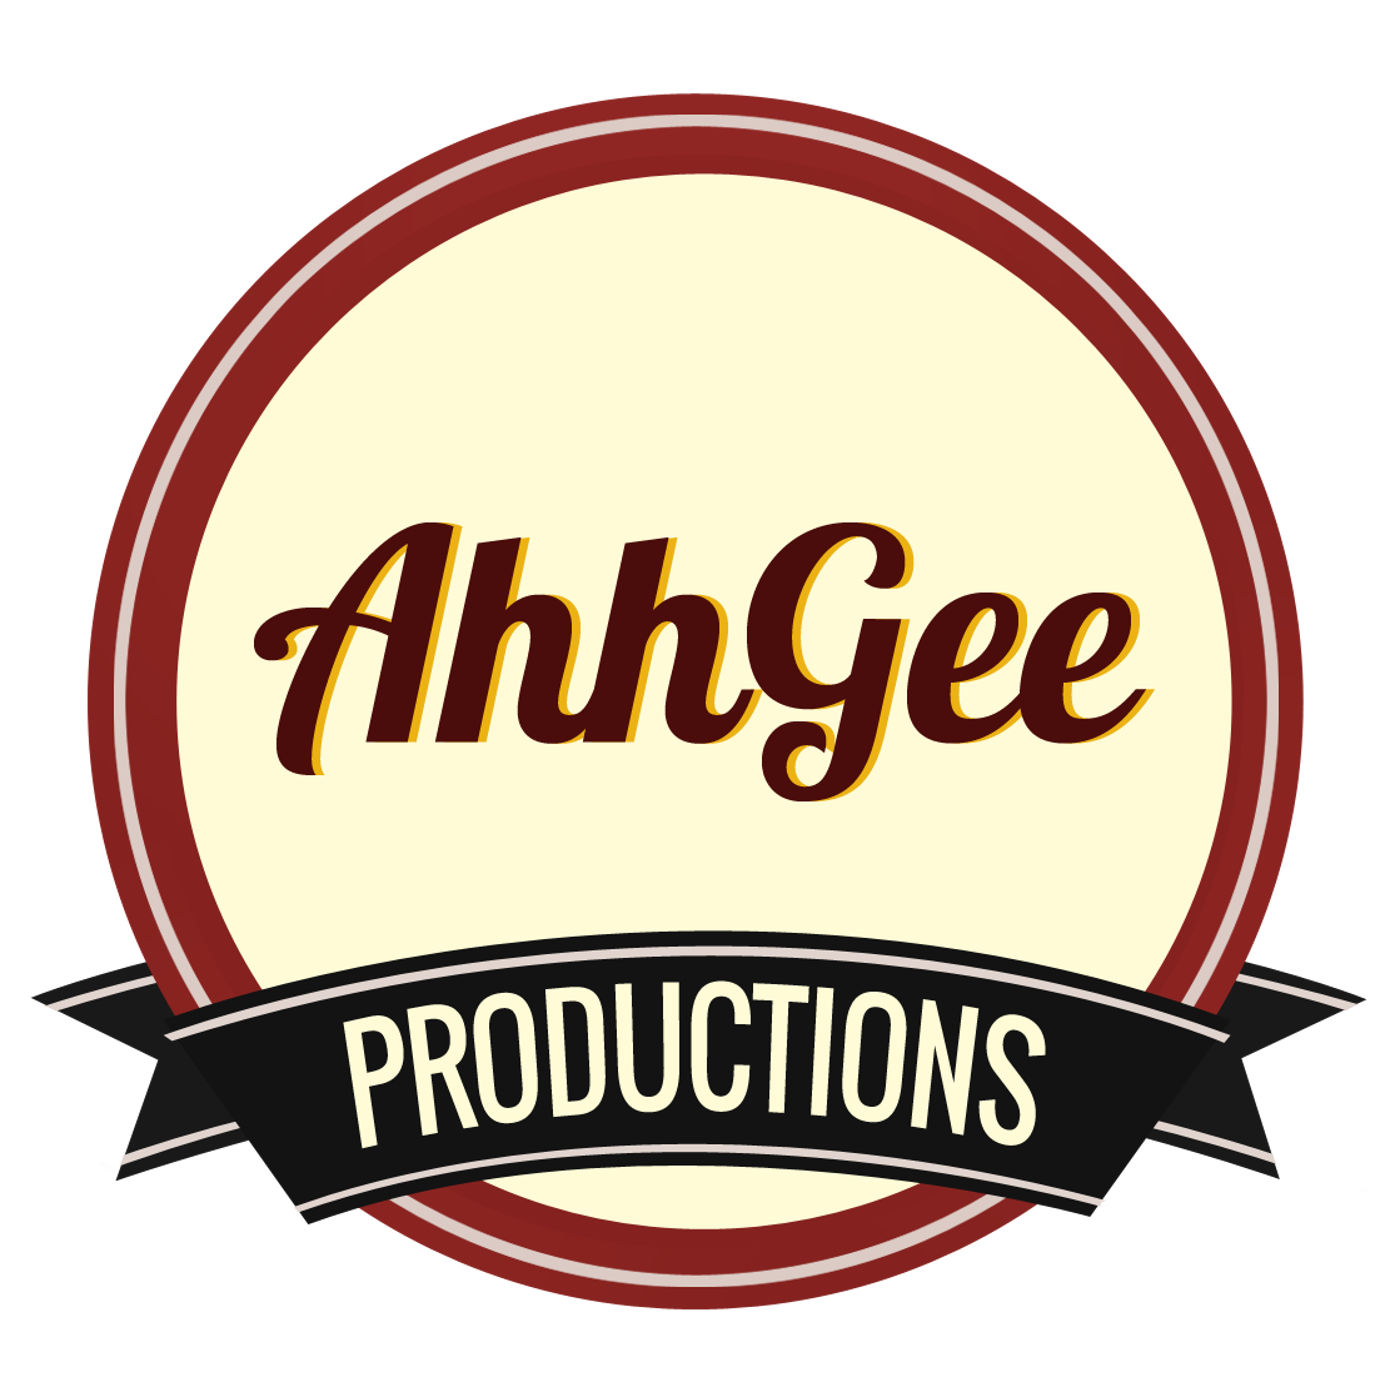 AhhGee Productions